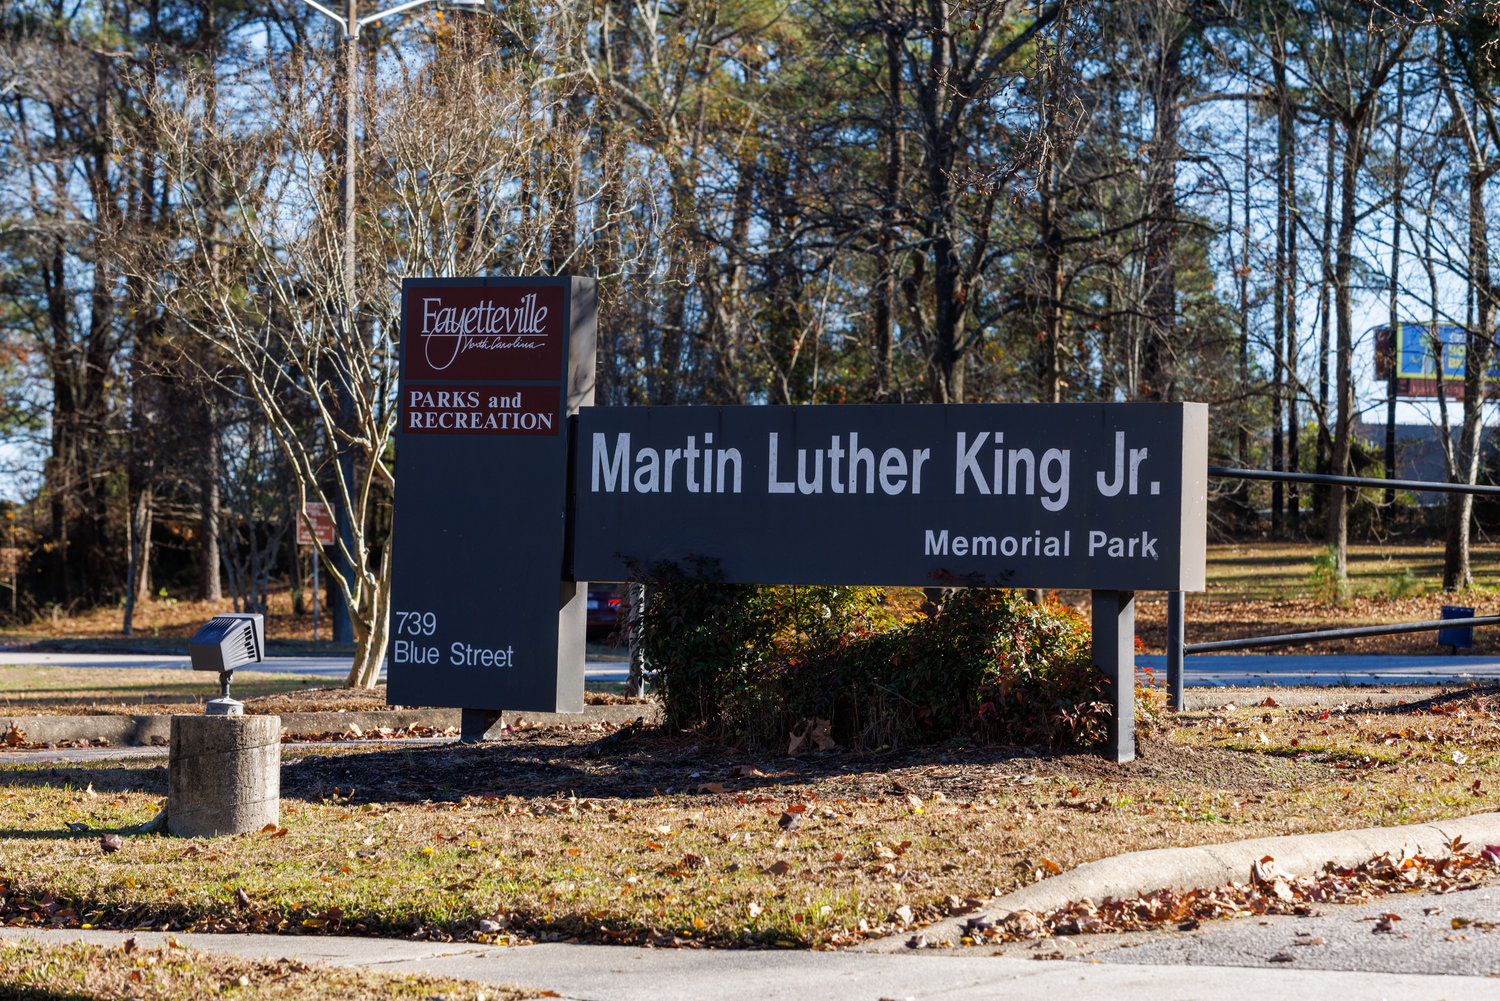 The Cumberland County Board of Commissioners on Thursday voted to place a $2.5 million agreement with the city of Fayetteville for improvements to the Martin Luther King Jr. Park on its Oct. 17 consent agenda.